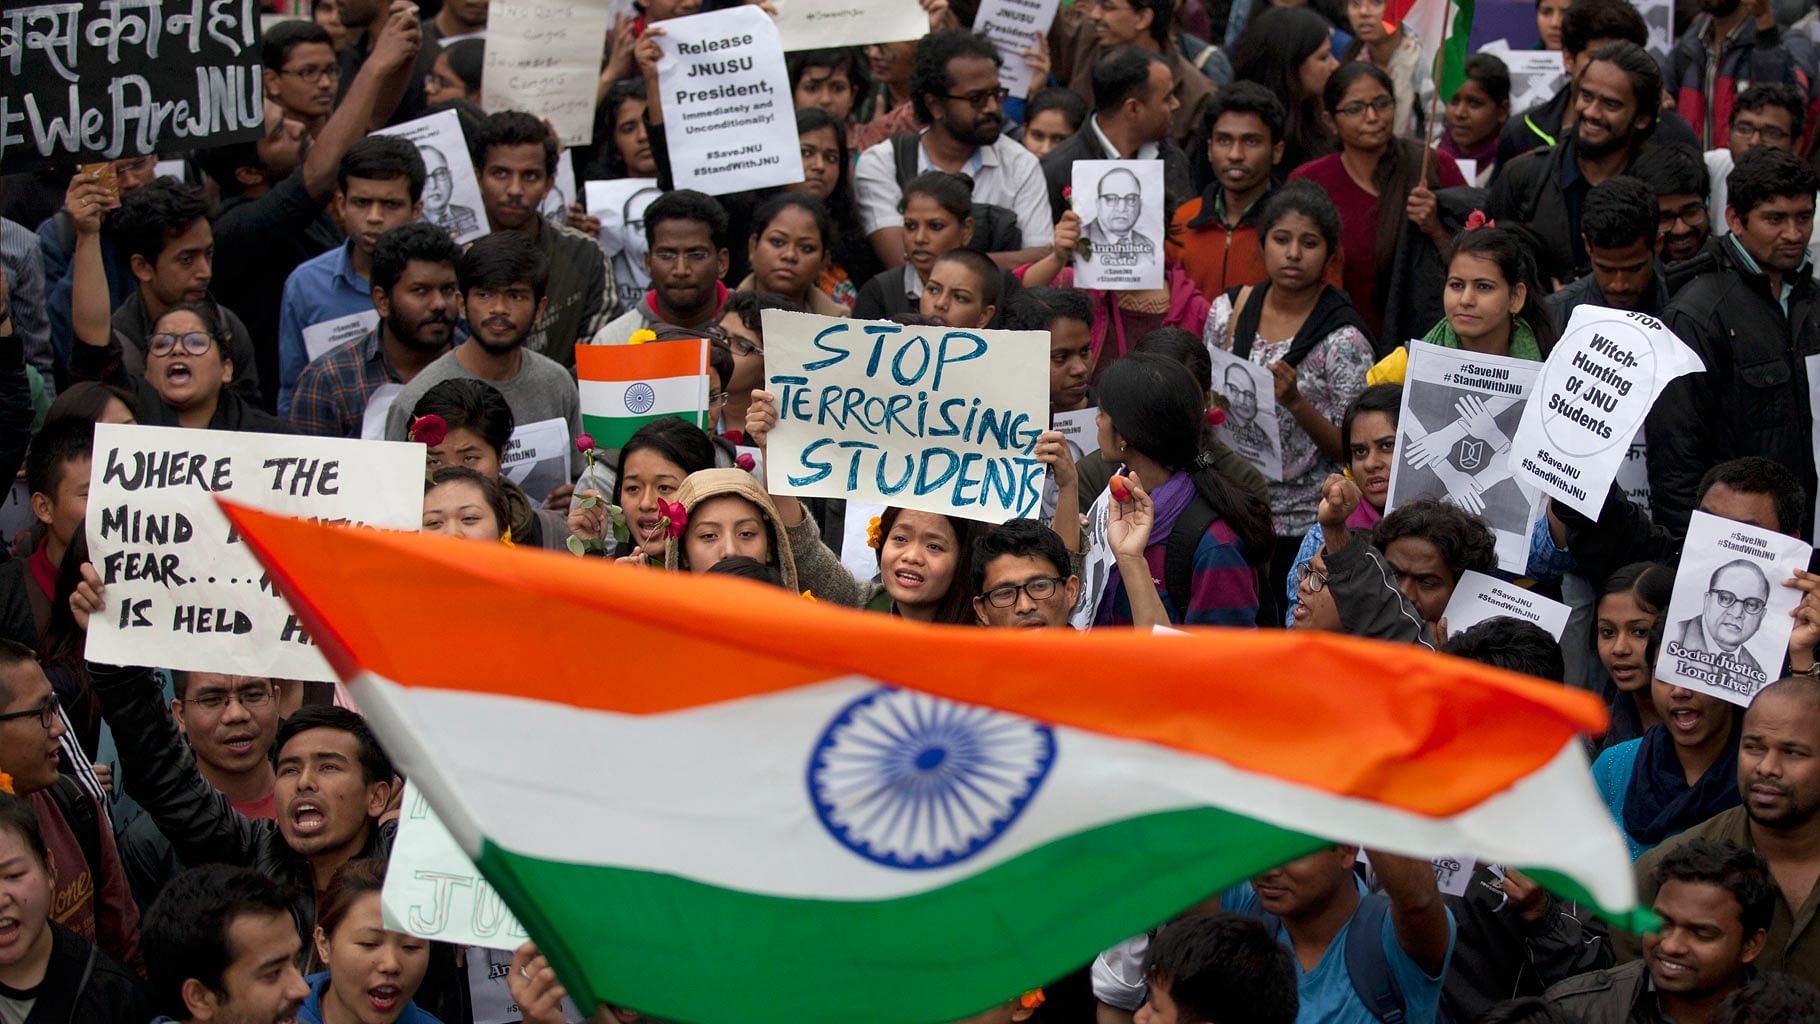 JNU students protest against the government crackdown in Delhi on Thursday, 18 February 2016. (Photo: AP)